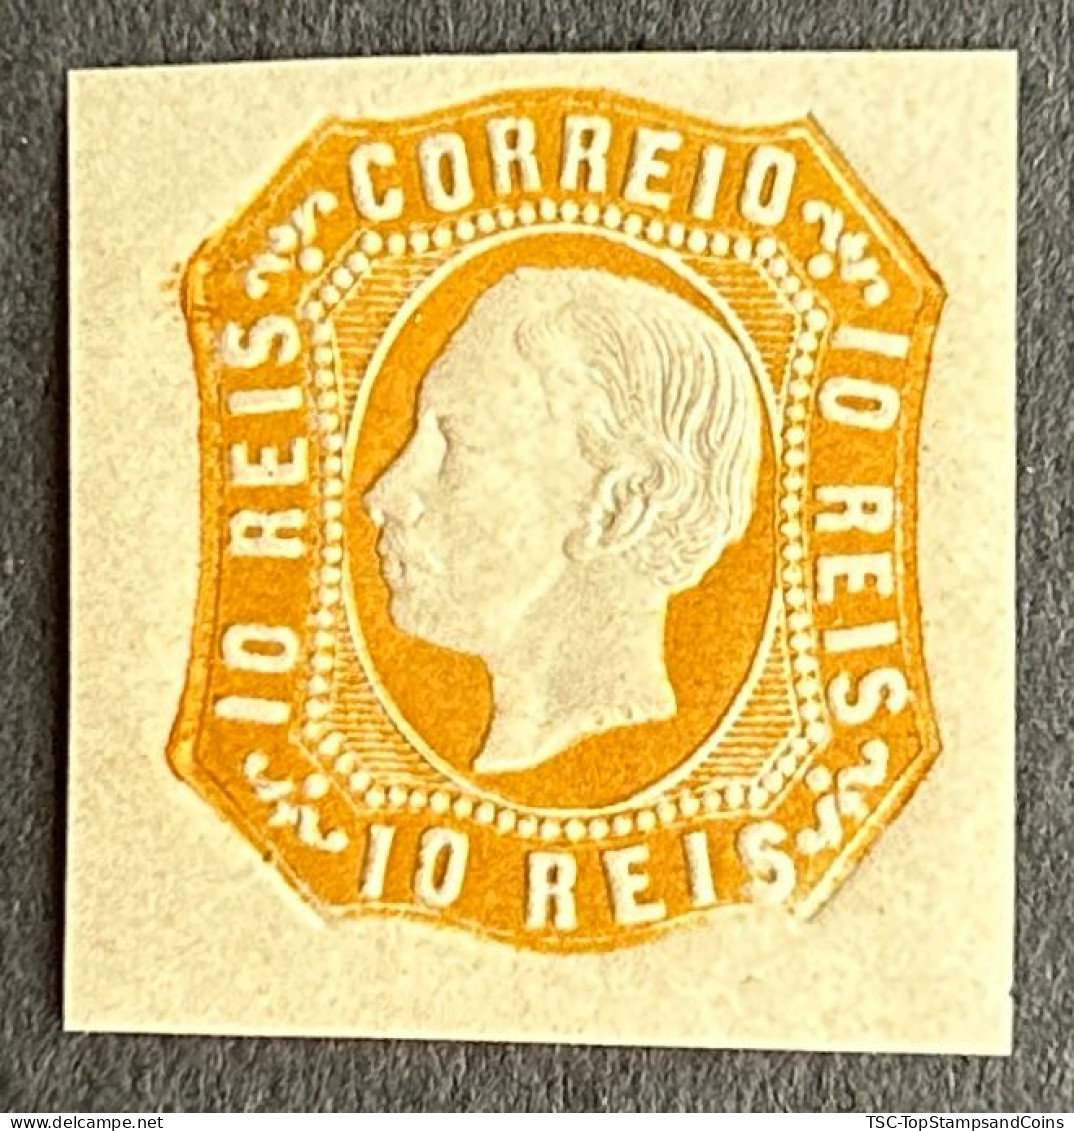 POR0015MNH - King D. Luís I - 10 Reis MNH Non Perforated Stamp - Portugal - 1863 - Unused Stamps